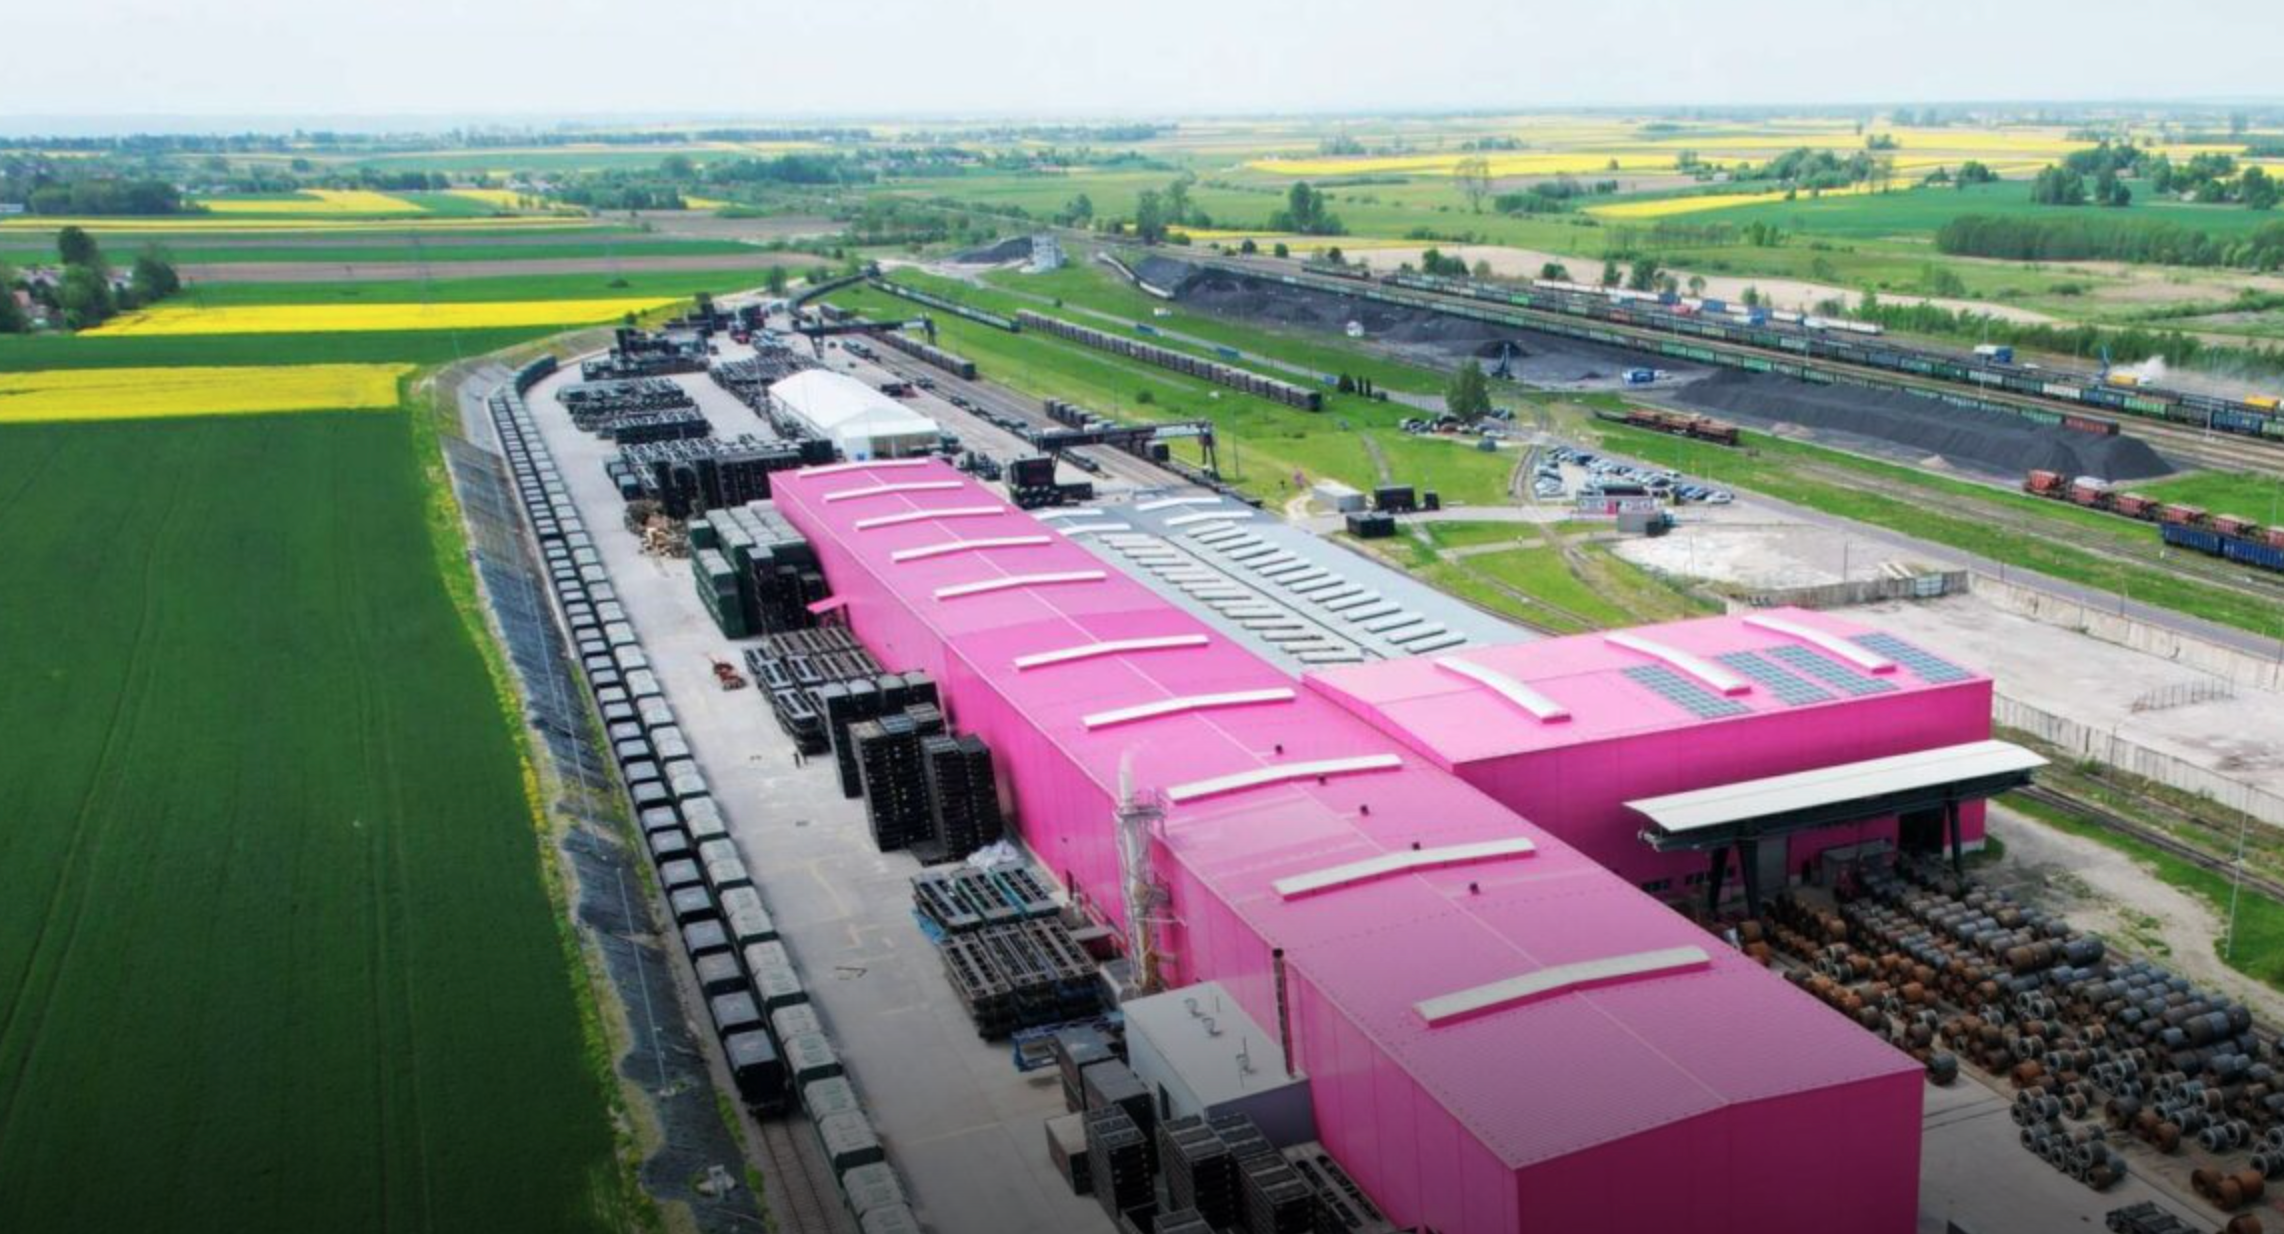 Large pink warehouses with rail connection in a green field setting